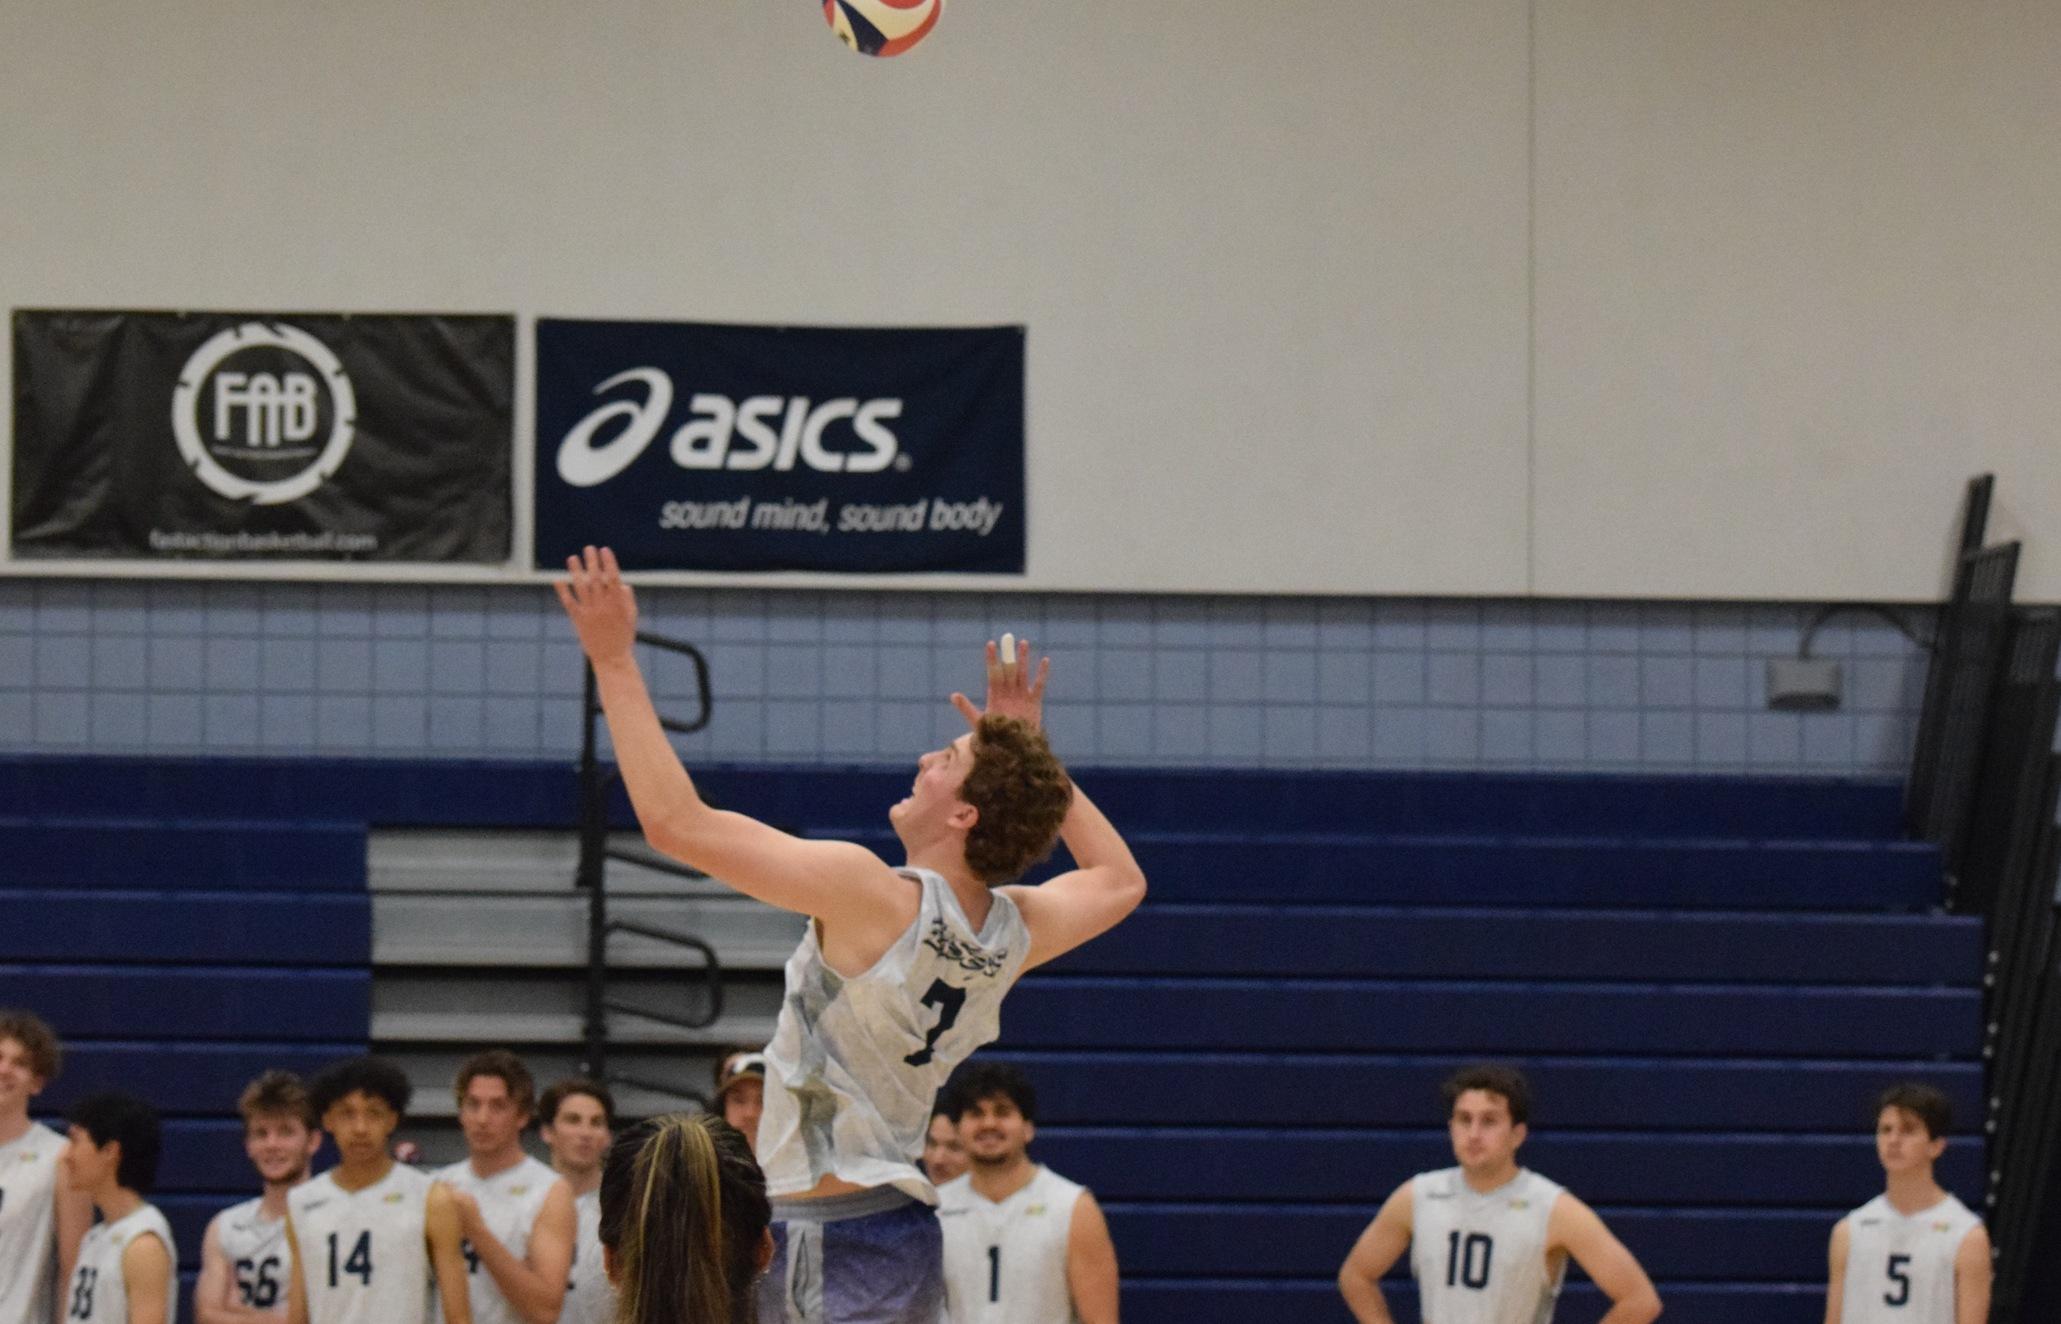 Men's volleyball team holds on to beat Miramar in five sets